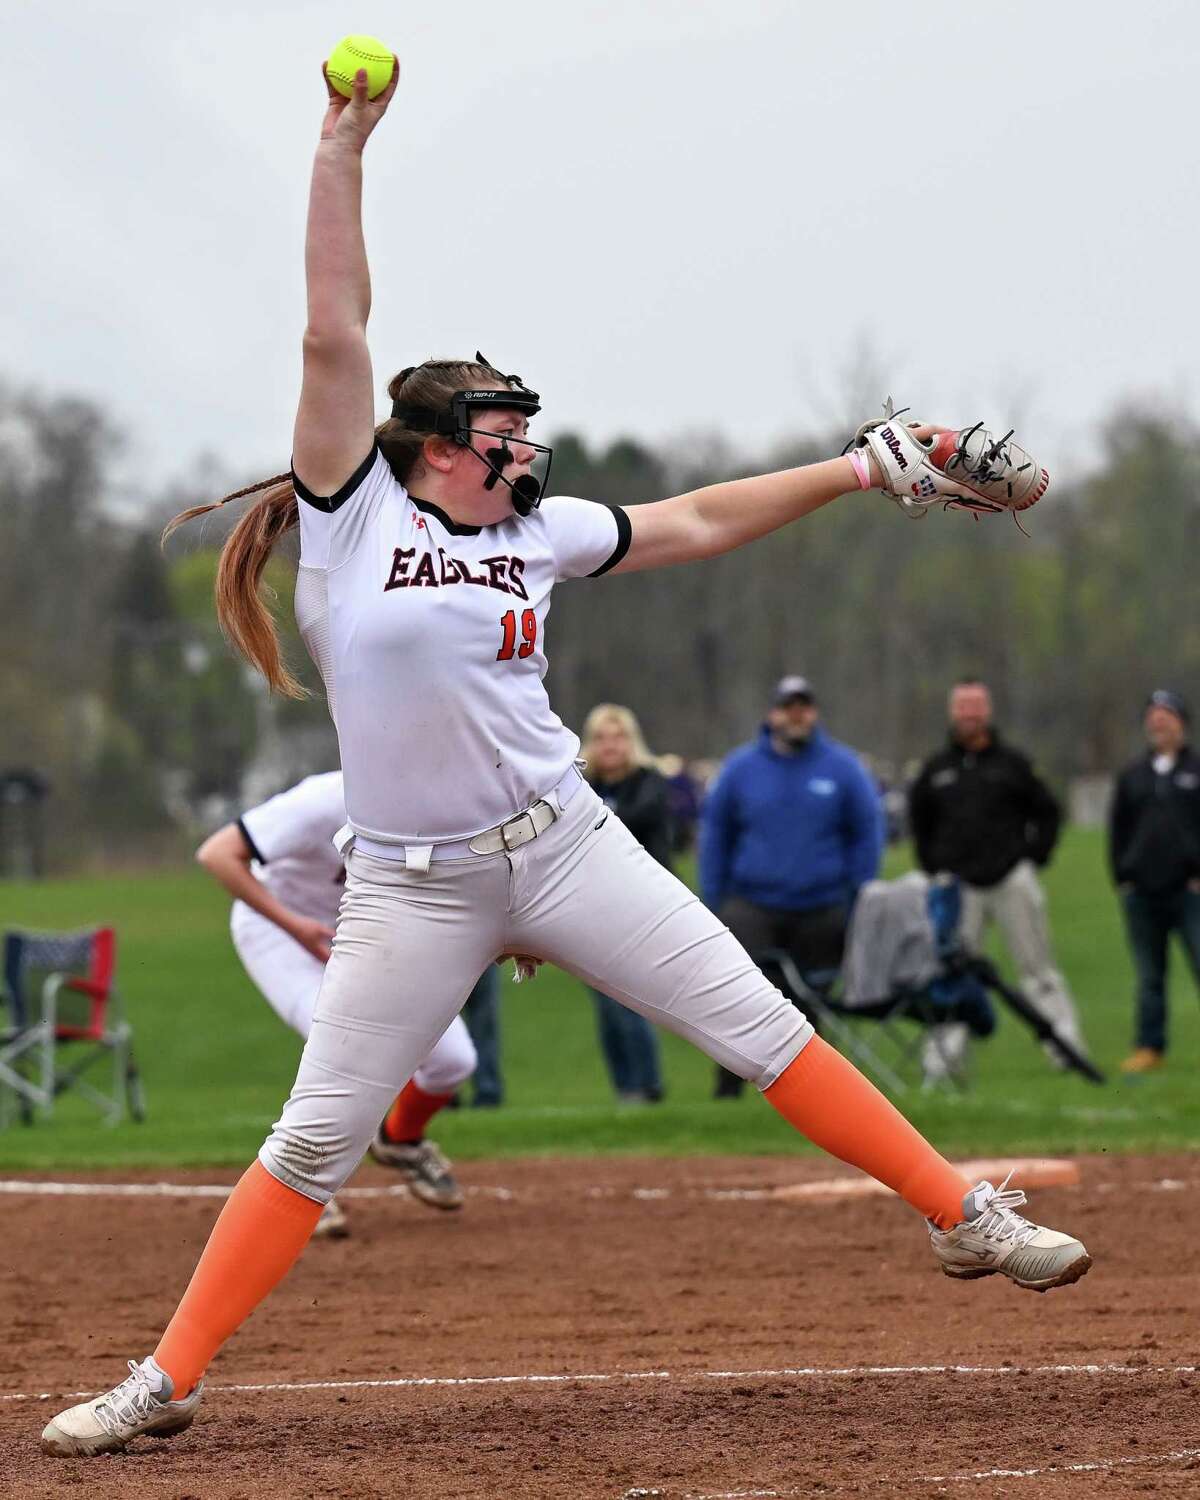 Bethlehem pitcher Anna Cleary during a Suburban Council matchup against Colonie at Bethlehem High School on Monday, May, 2, 2022. (Jim Franco/Special to the Times Union)